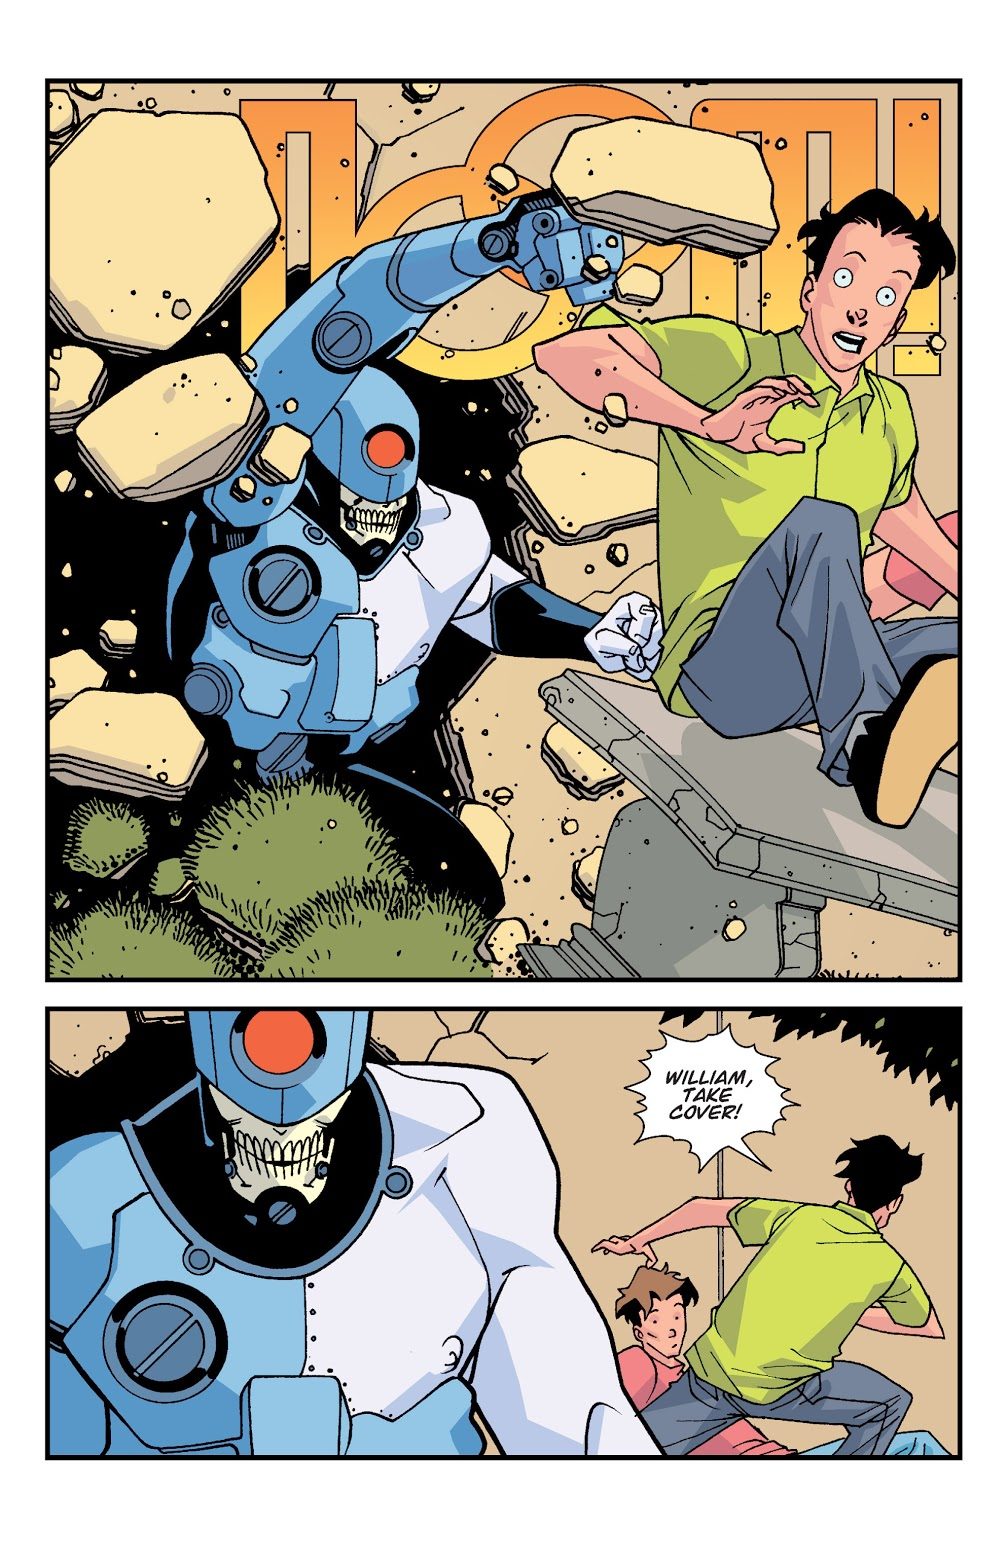 Invincible: Vol. 2 - A cyborg appears on campus while Mark and William are visiting.